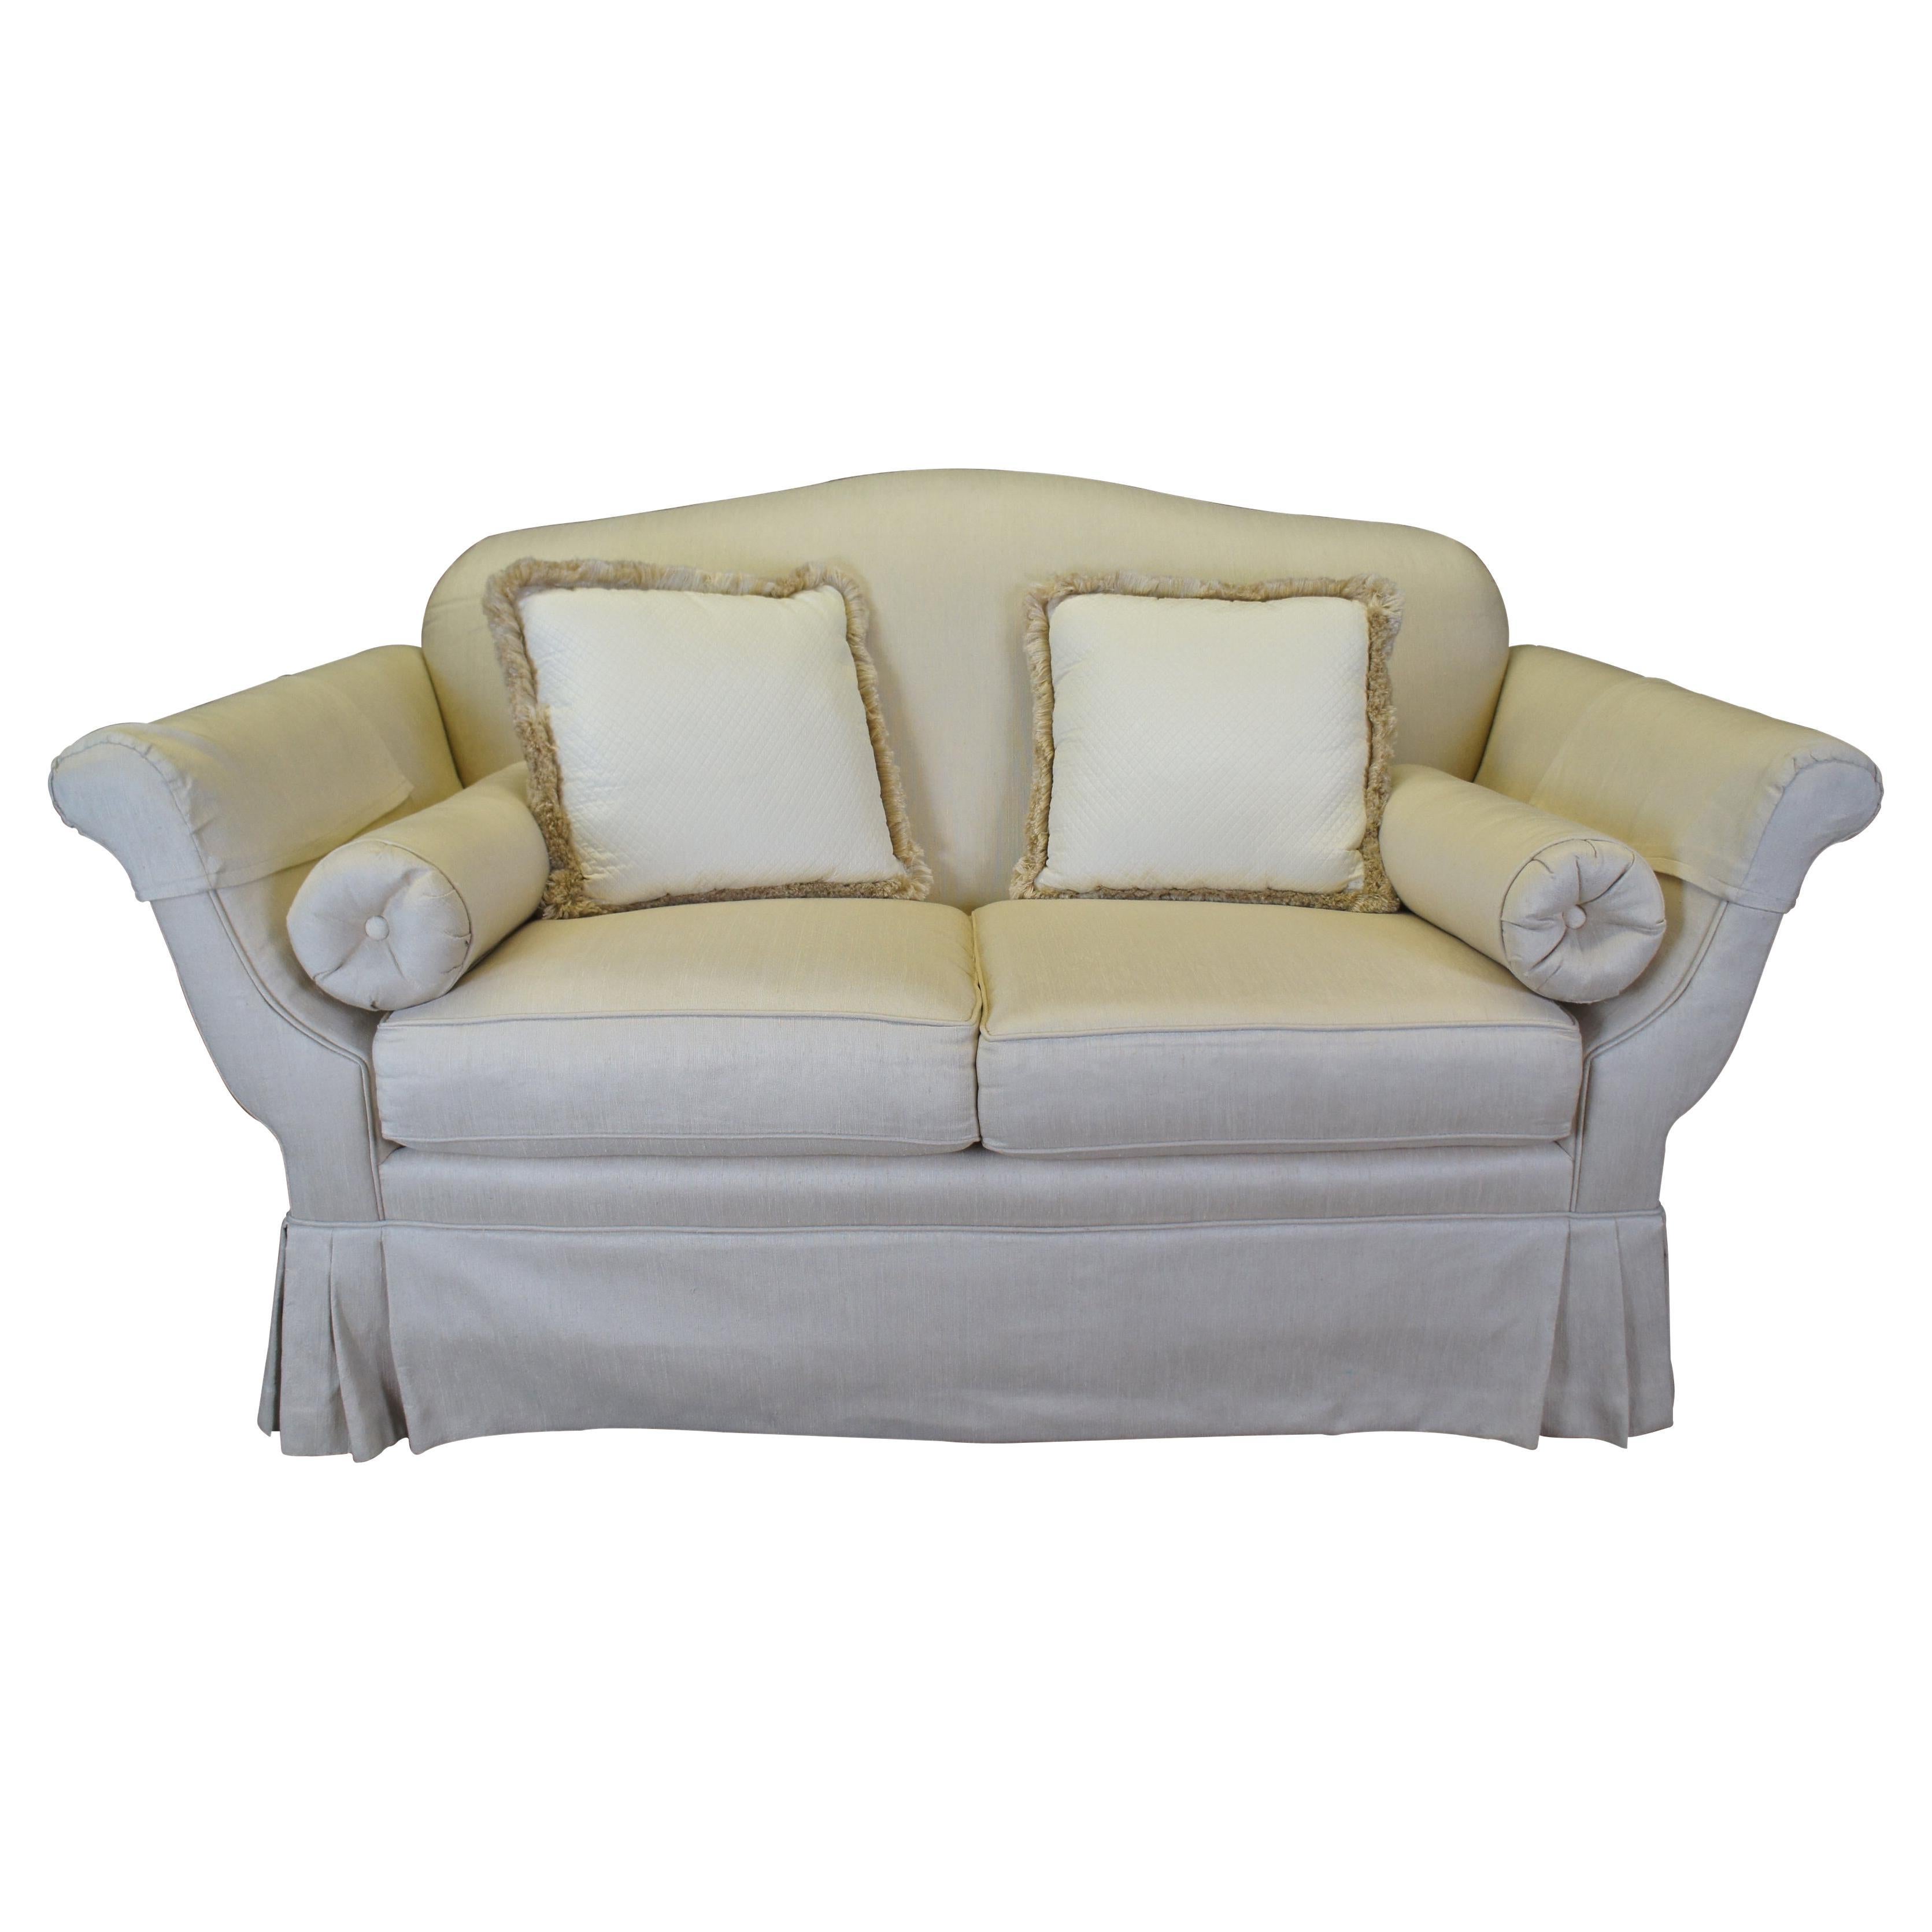 Vintage French Knole Style Silk Down Filled High Arm Loveseat Settee Sofa Couch For Sale